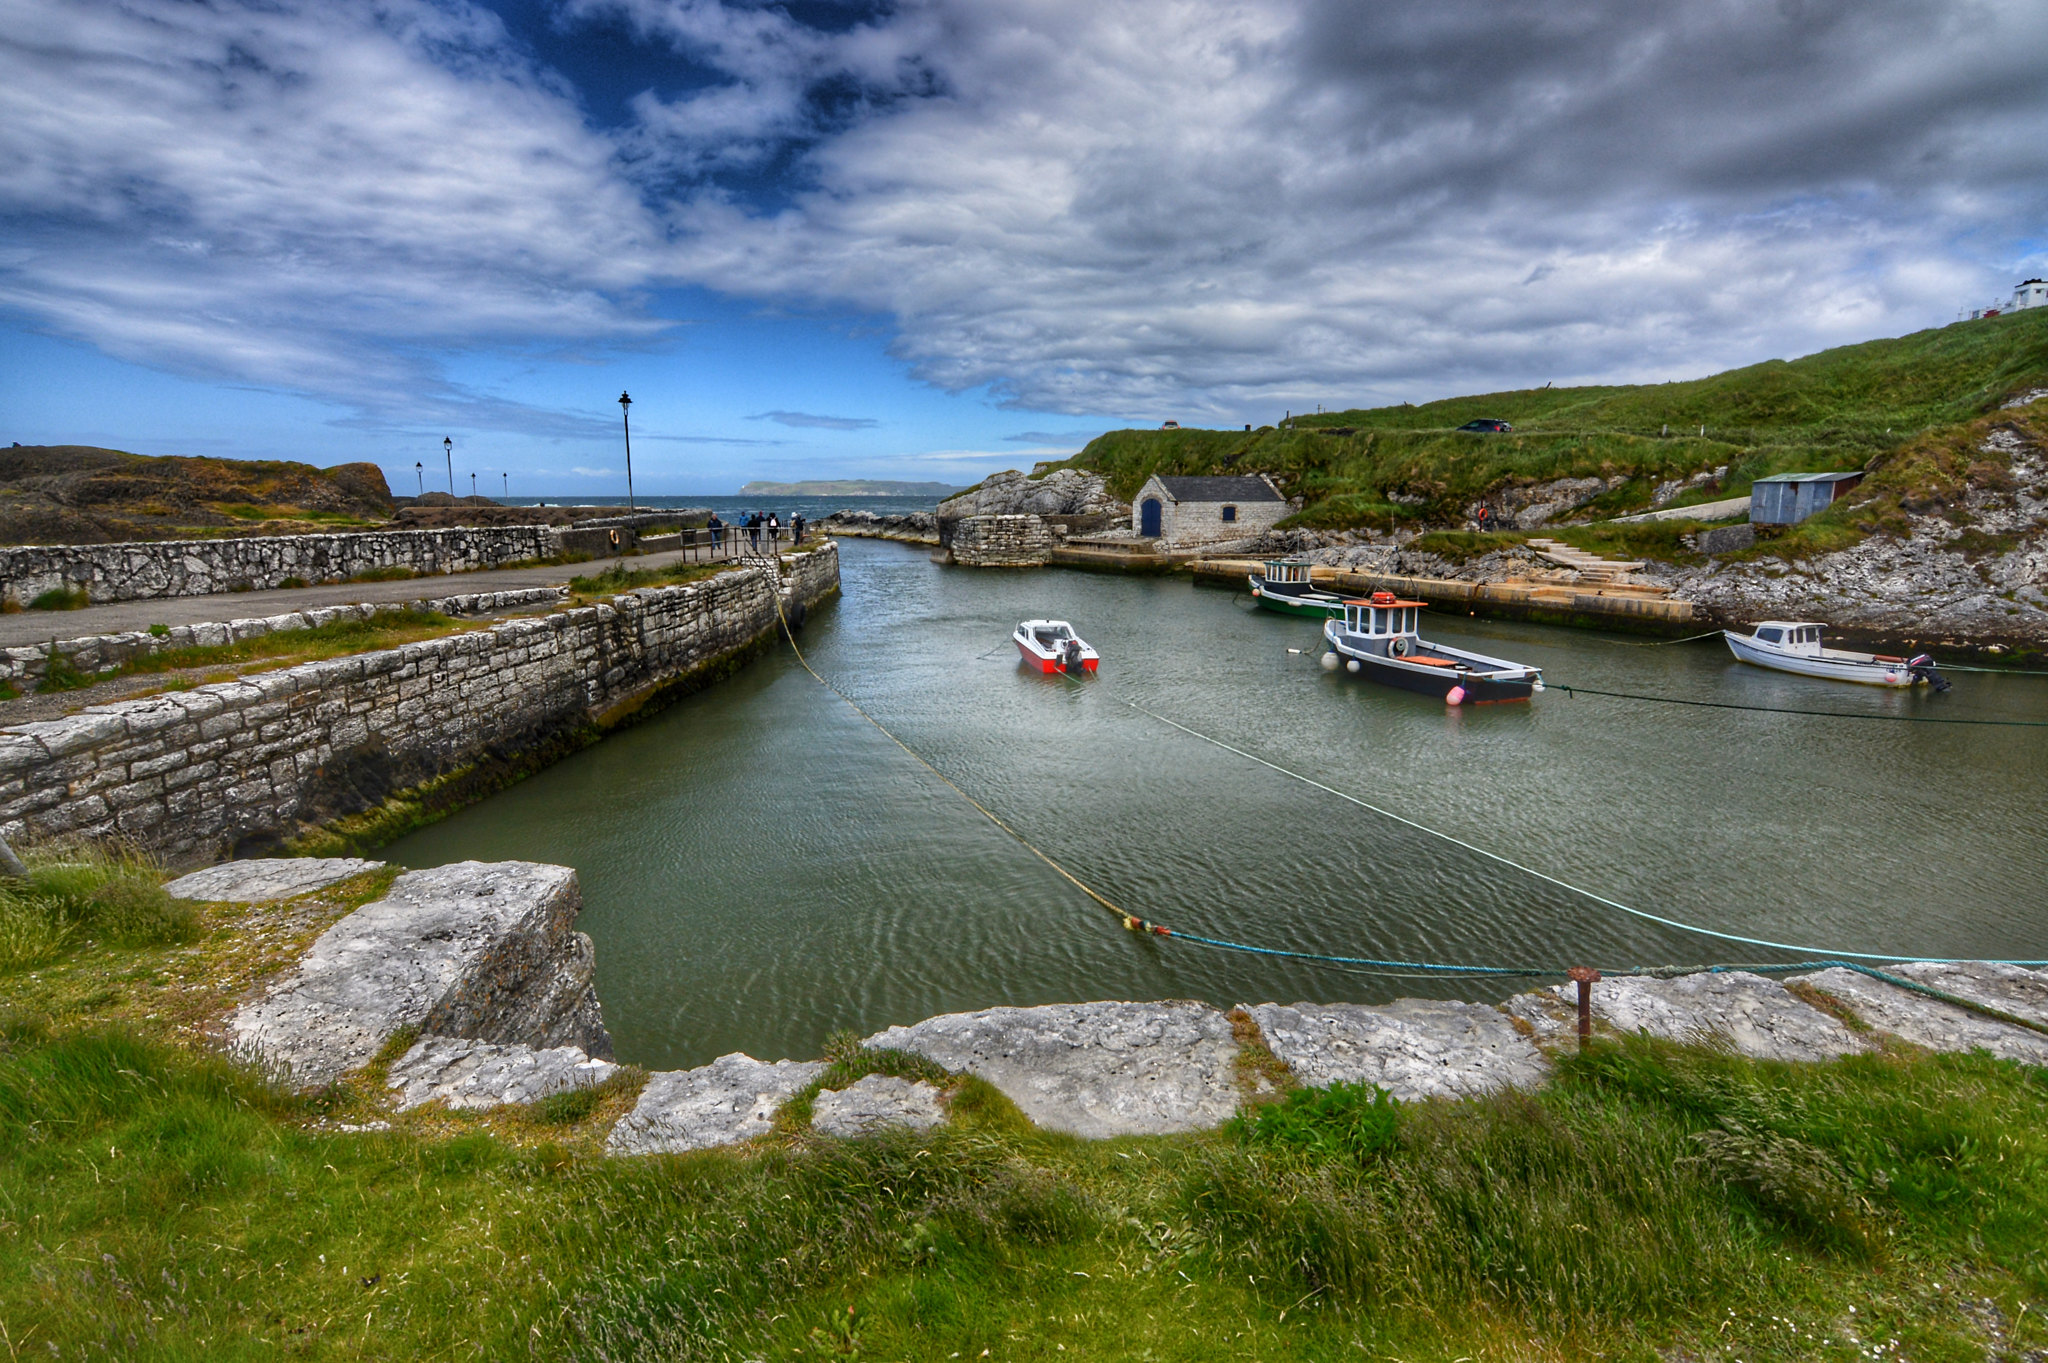 Small boats moored in Ballintoy Harbour, a stone built harbour in Northern Ireland